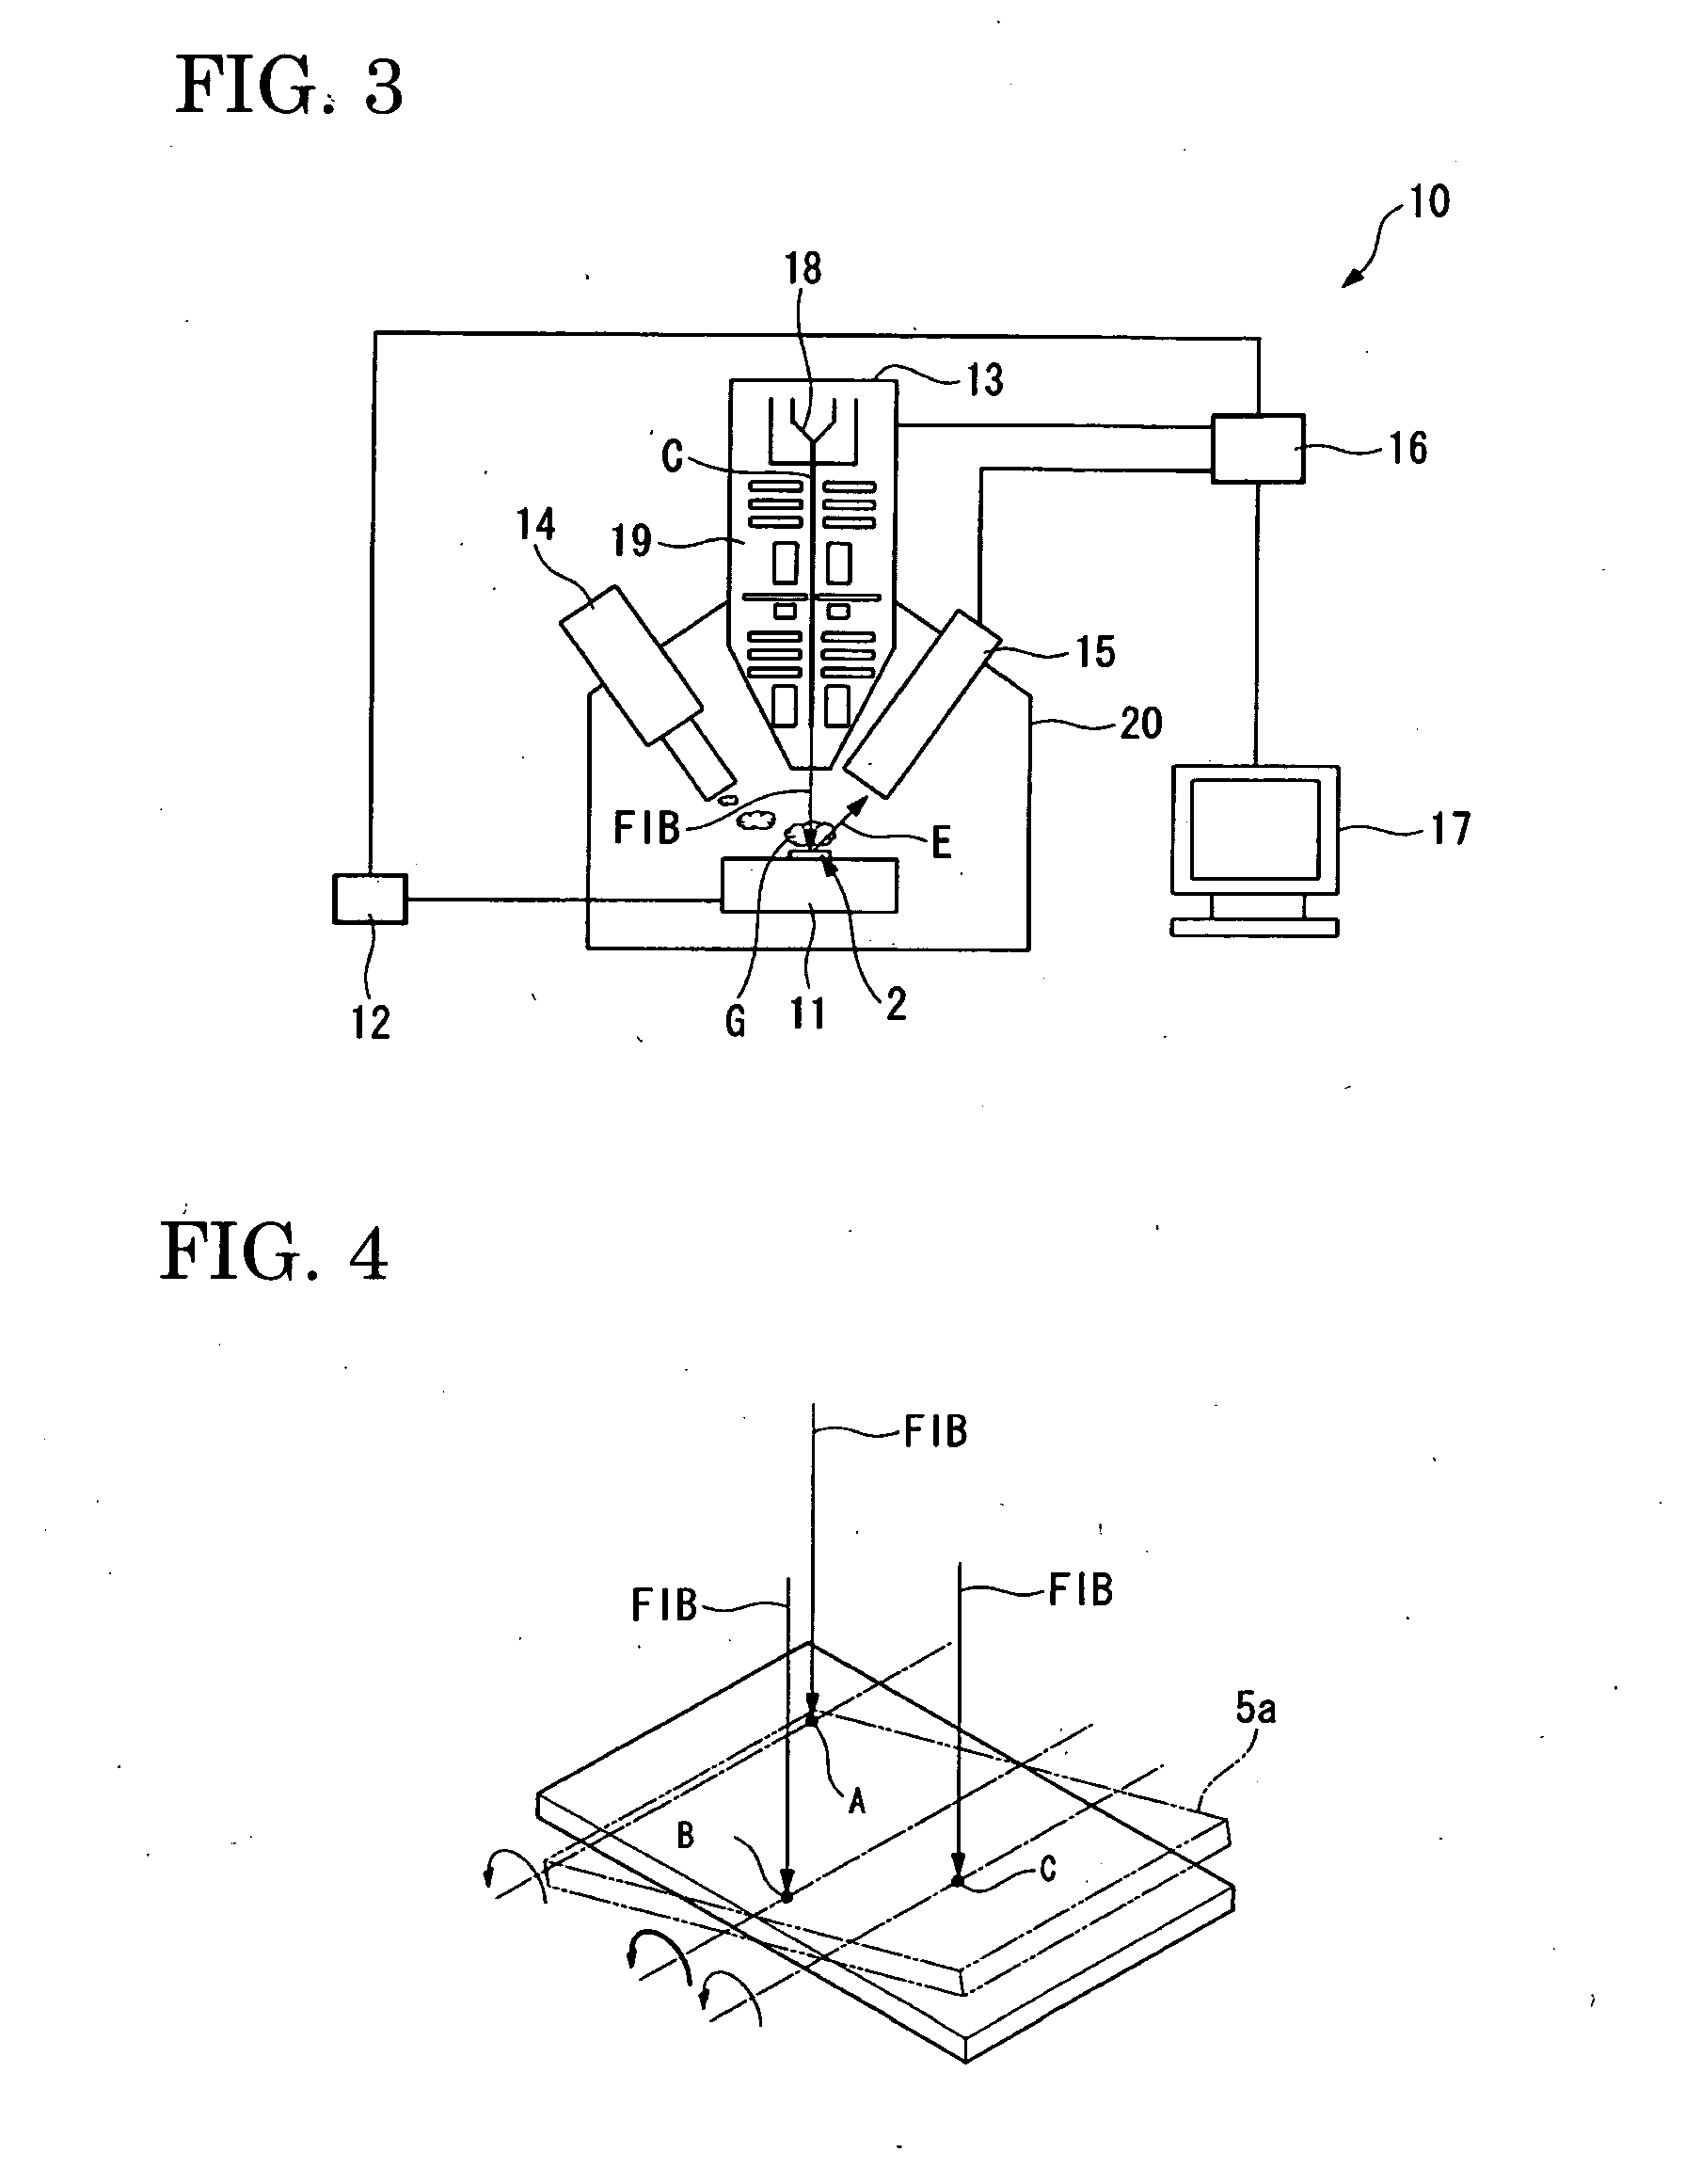 Substrate, micro structure, method of making reference scale, and method of measuring length of micro structure